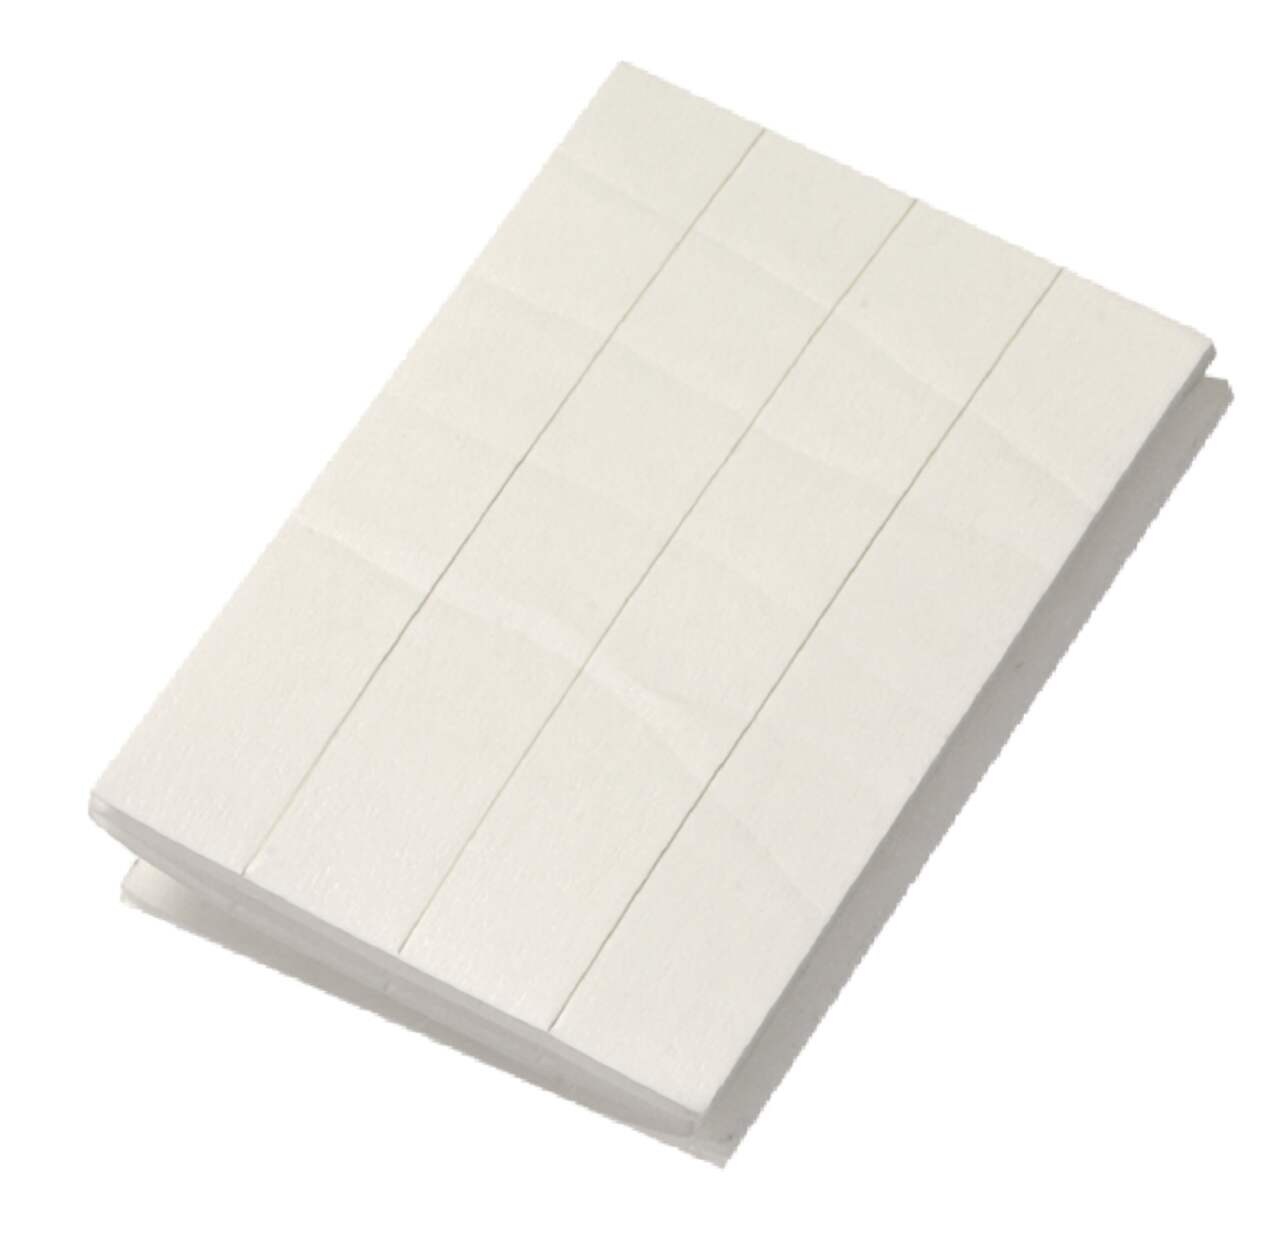 Double Sided Foam Squares - Perfect for easy arts and craft